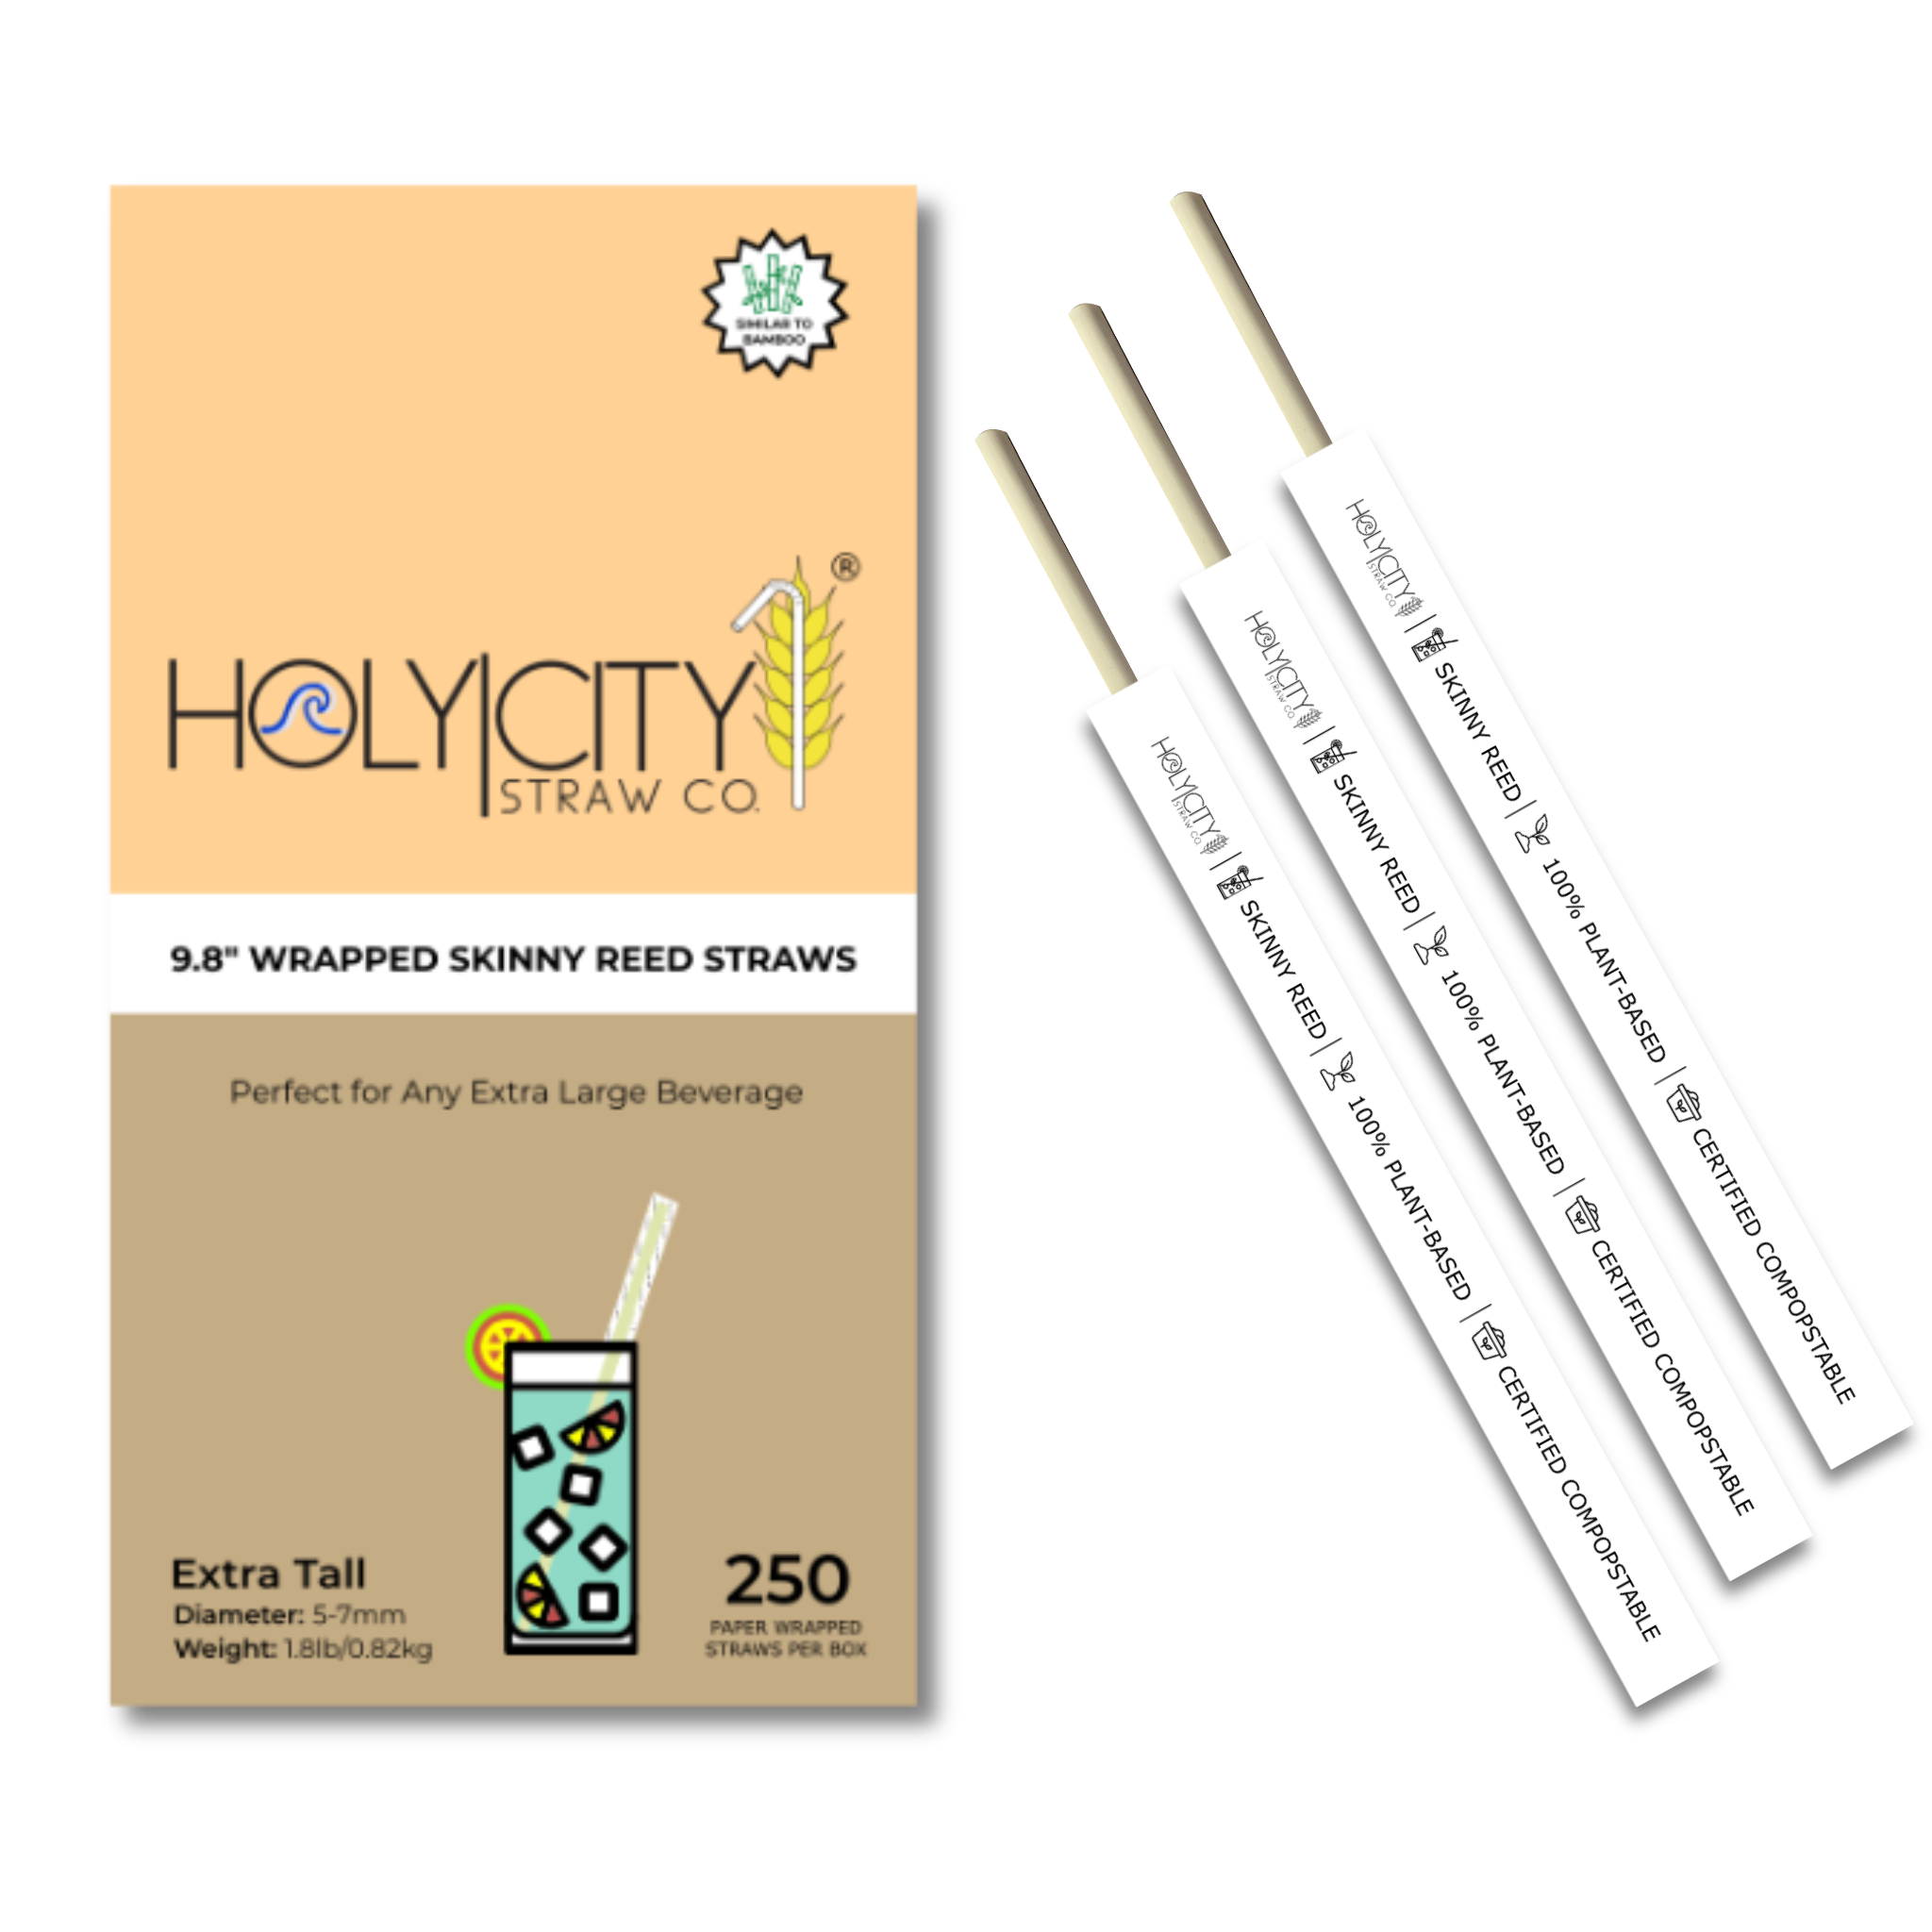 Product display for Holy City Straw Co.'s 